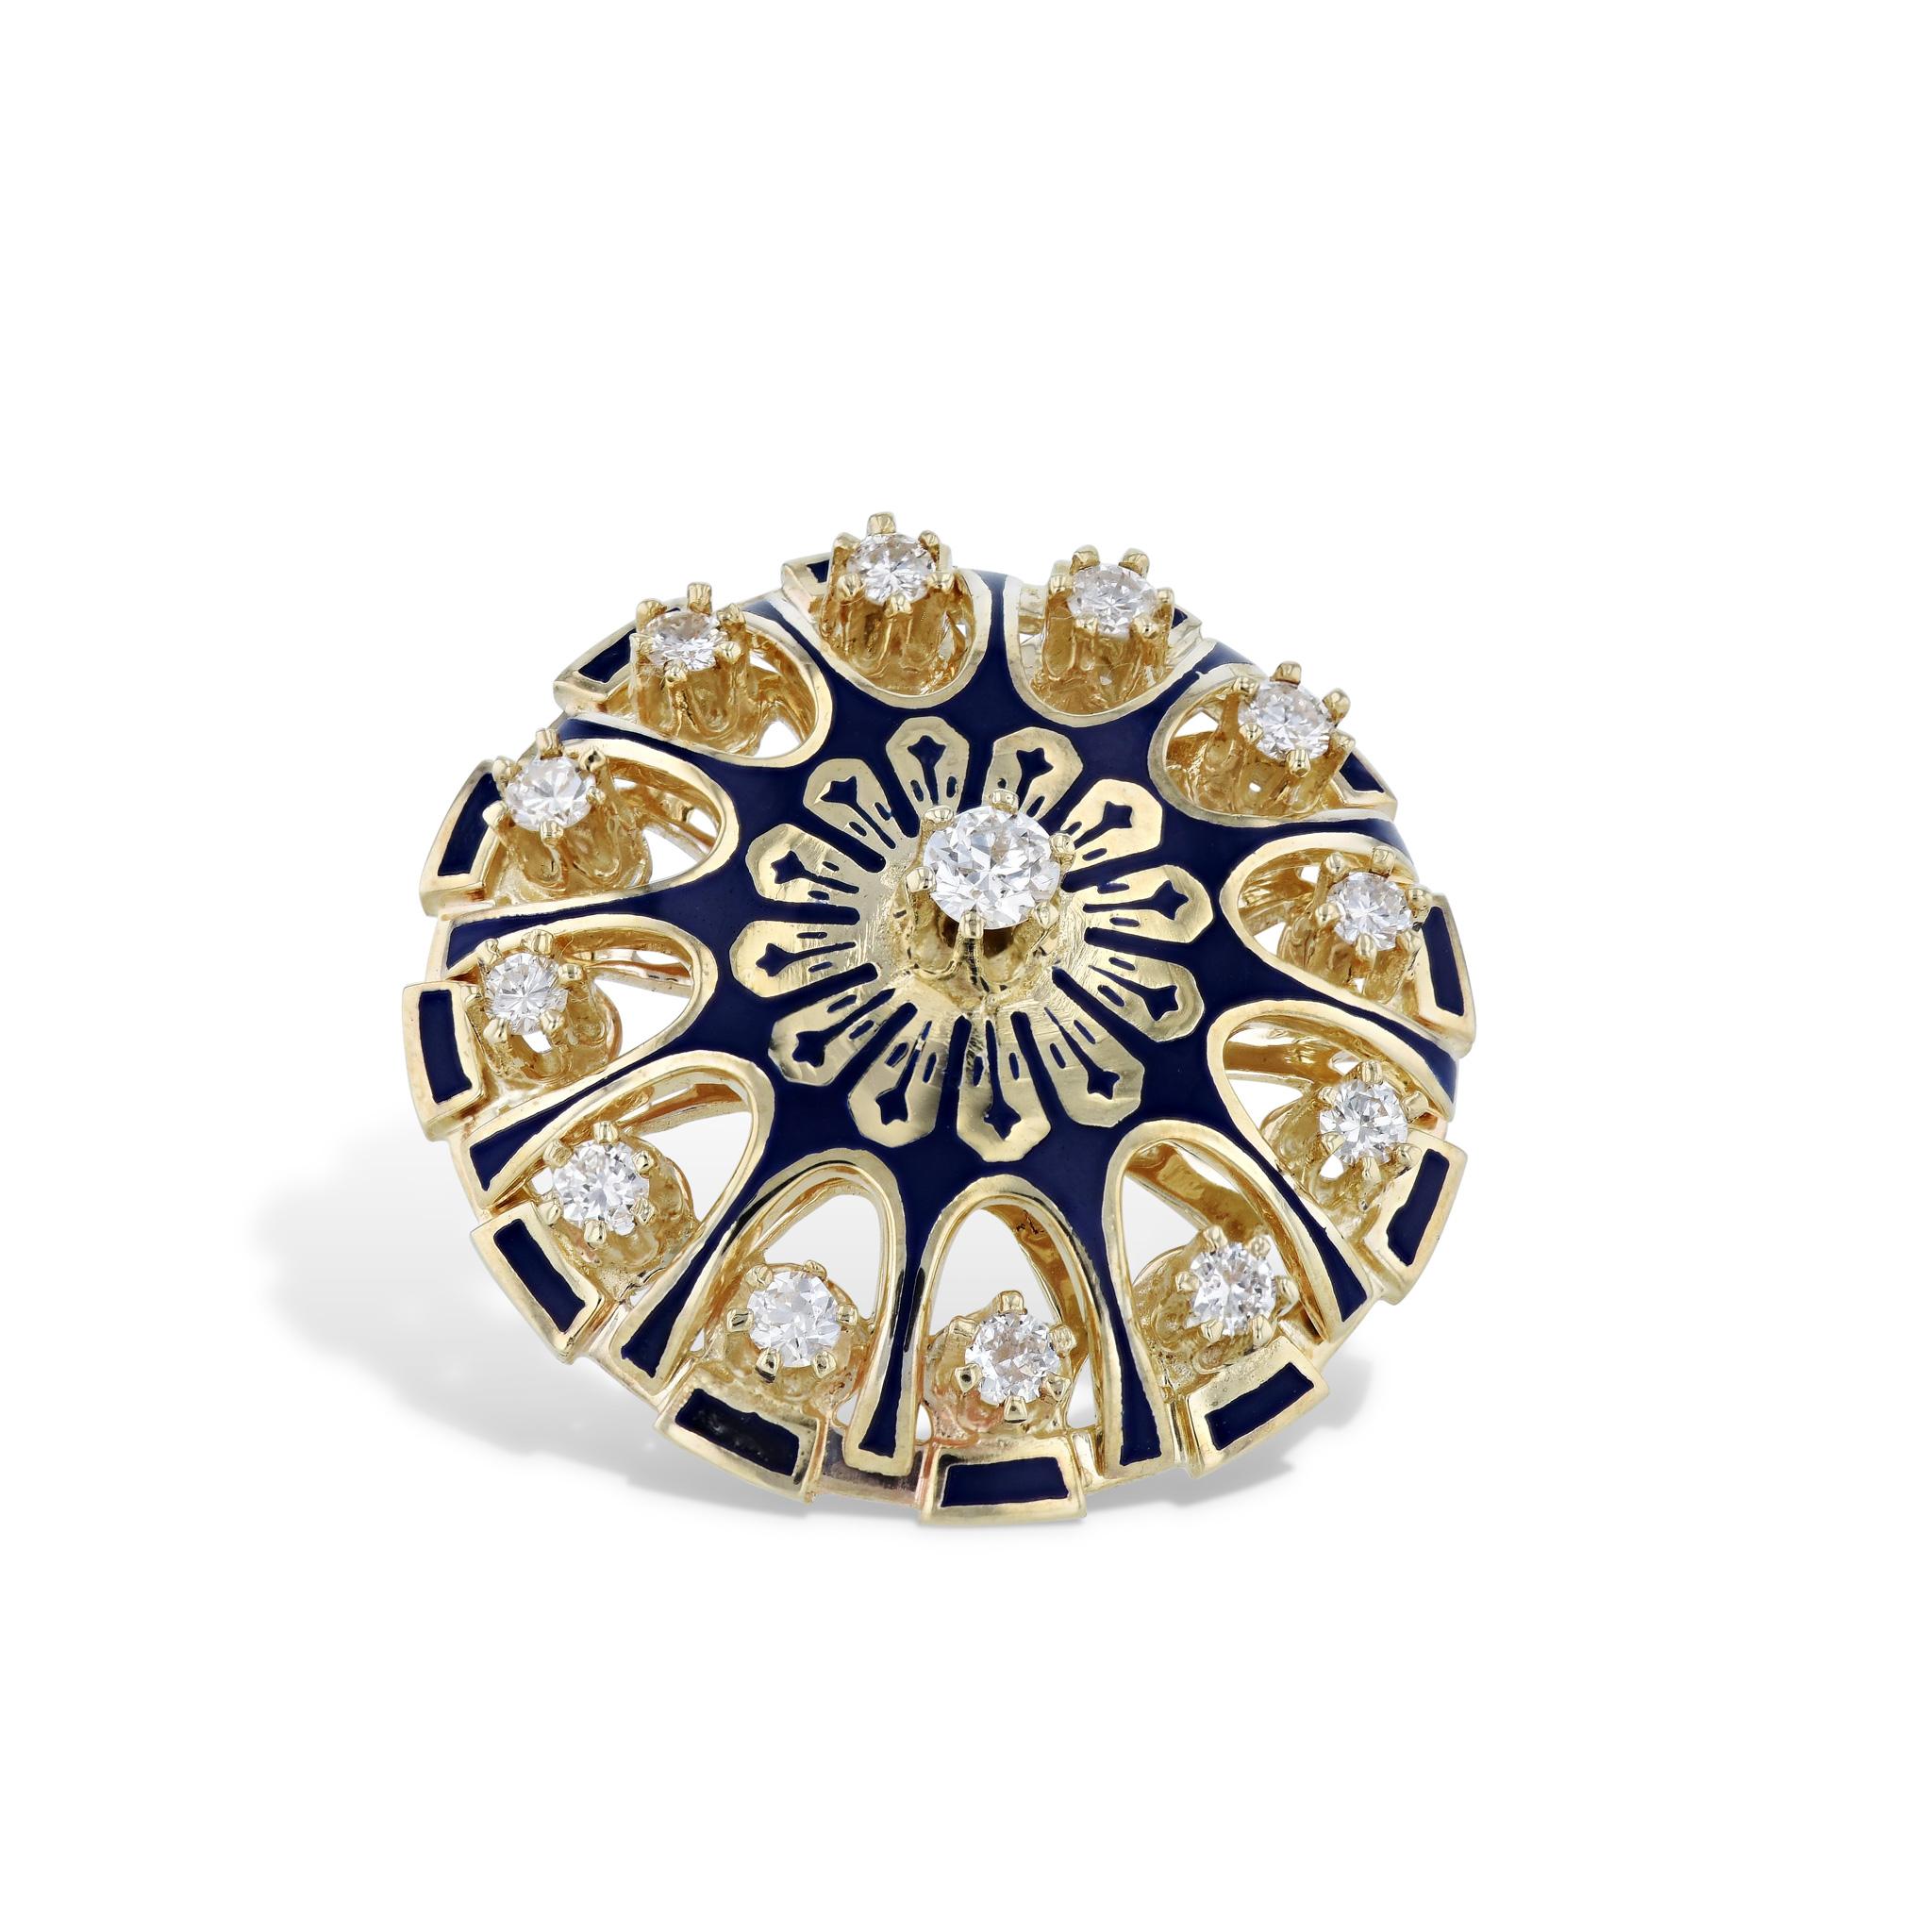 This 14kt yellow gold diamond estate brooch is the epitome of elegance and class. 13 dazzling diamonds sparkles brightly. Creating a timeless piece of jewelry, this brooch is a perfect addition to any vintage or estate collection.
Yellow Gold